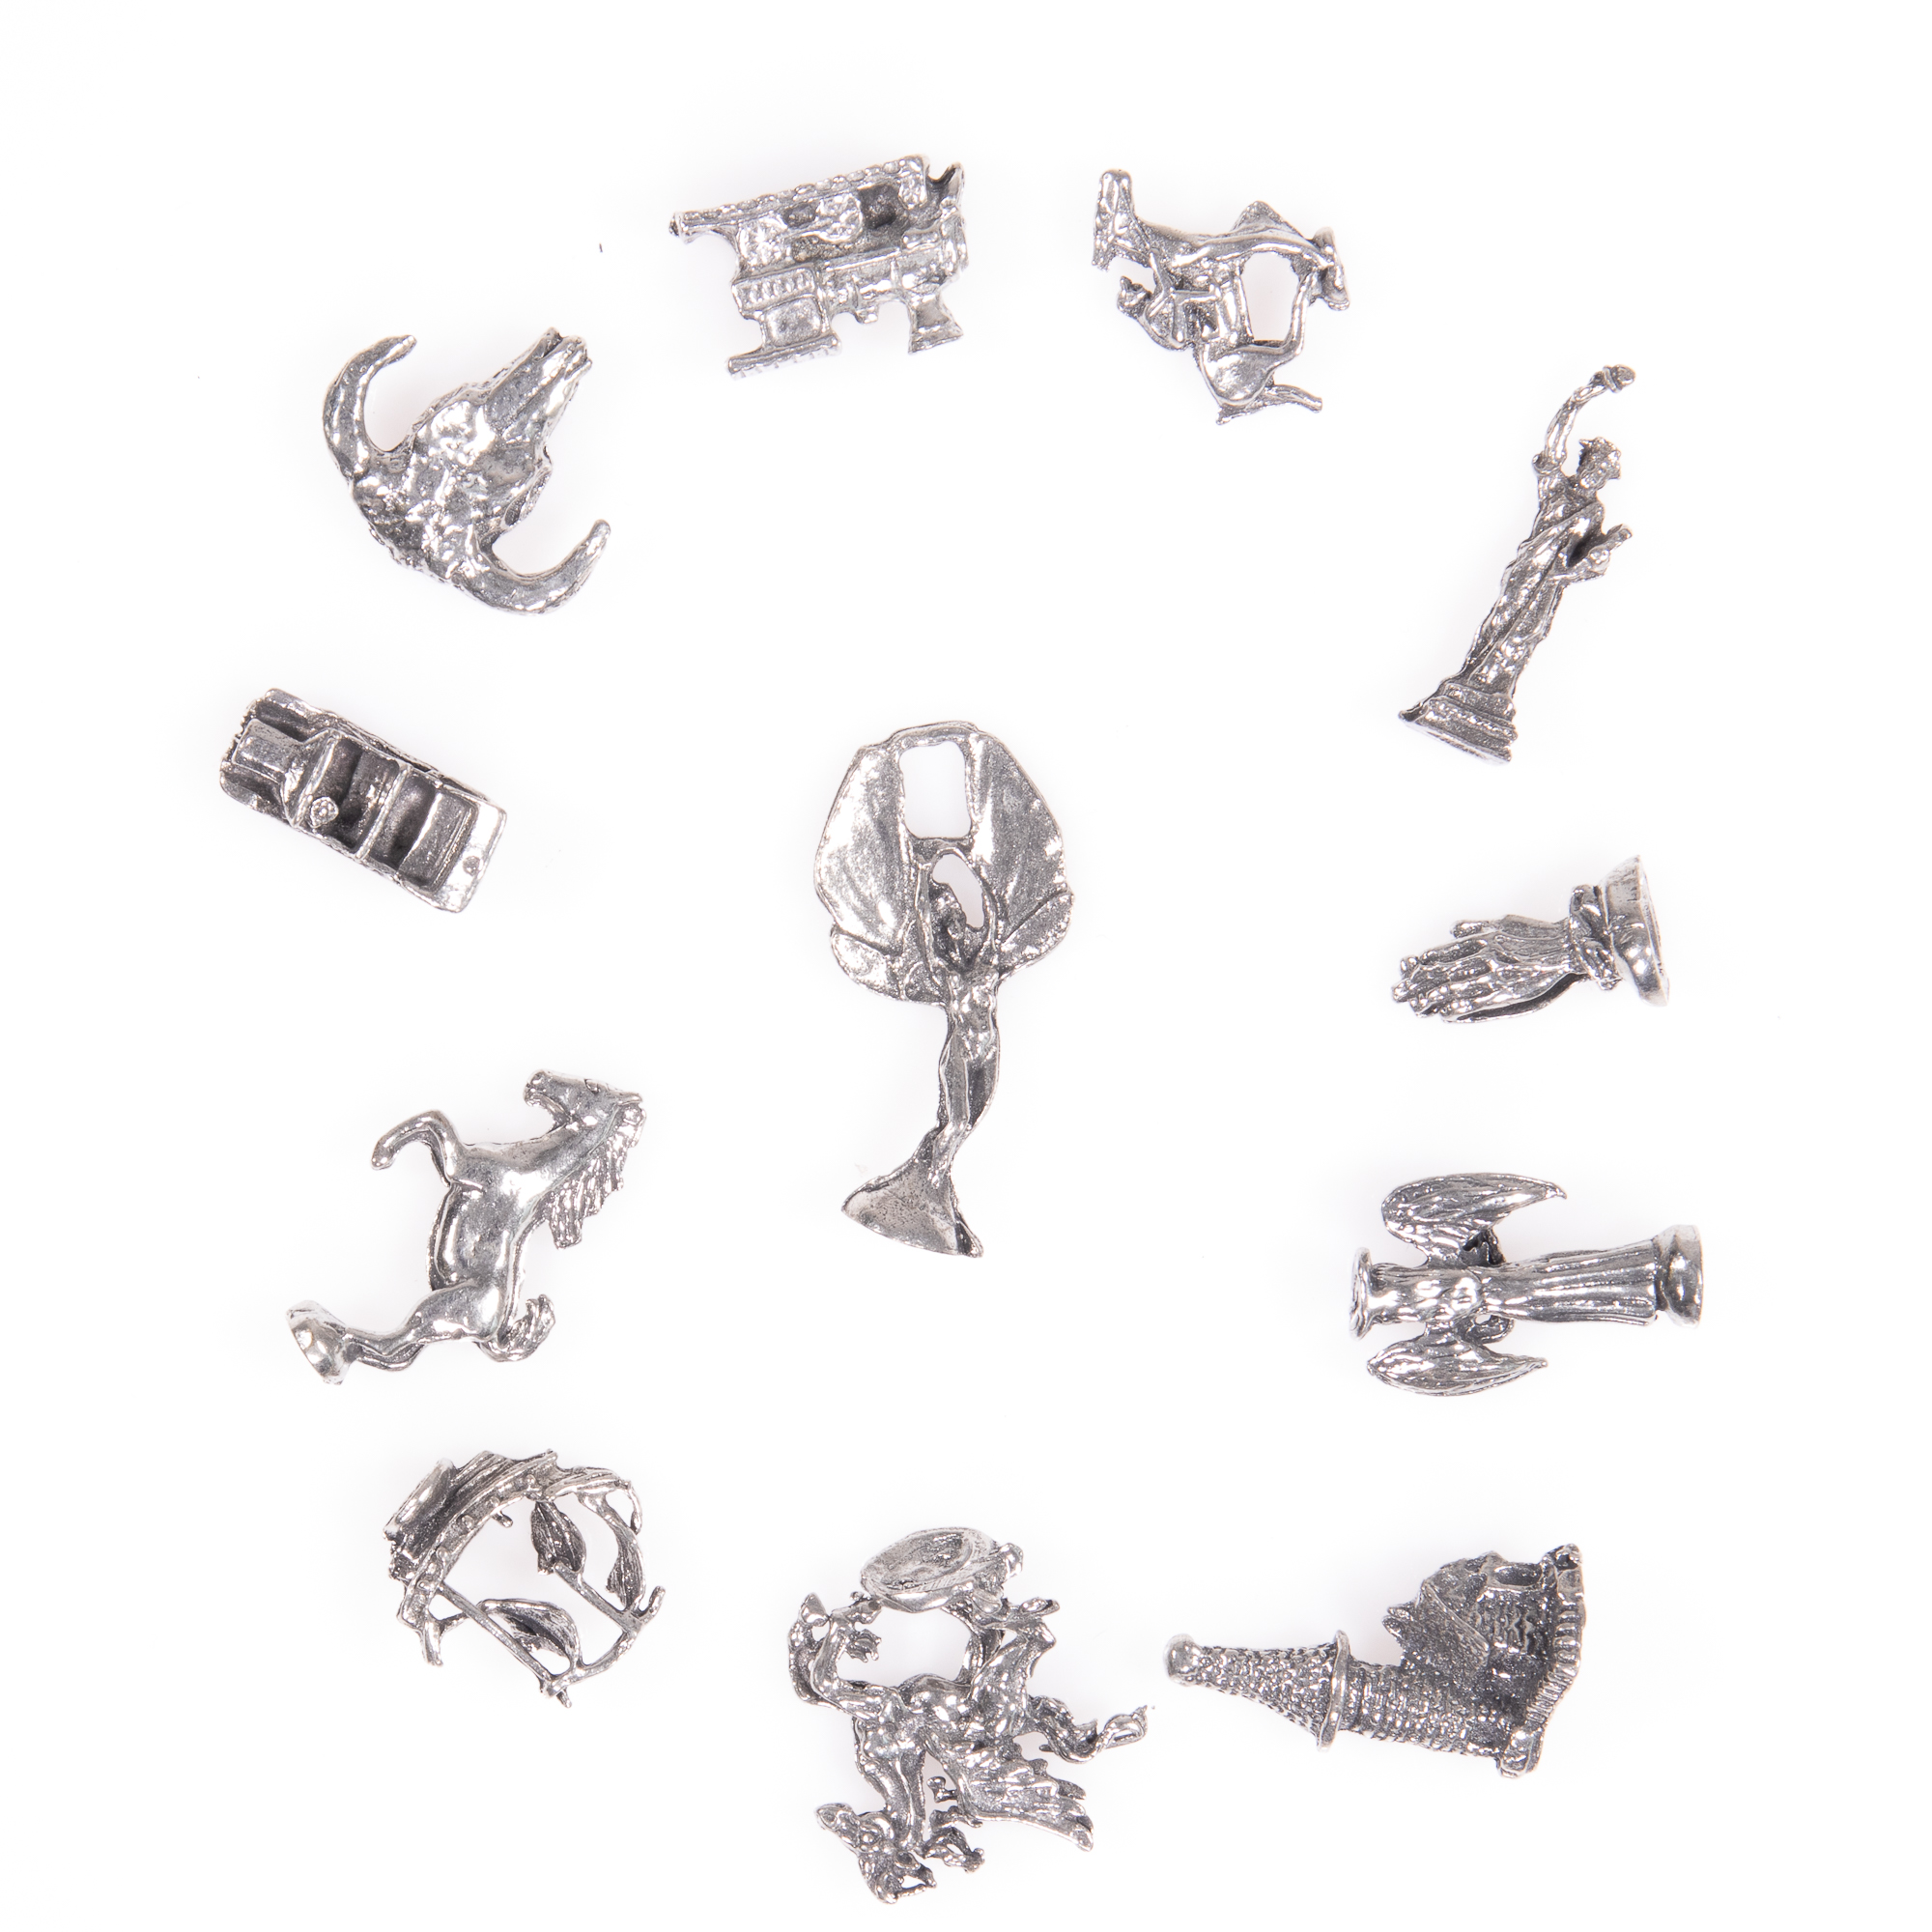 Selection of 12x Silver Novelty Charms - Image 2 of 6